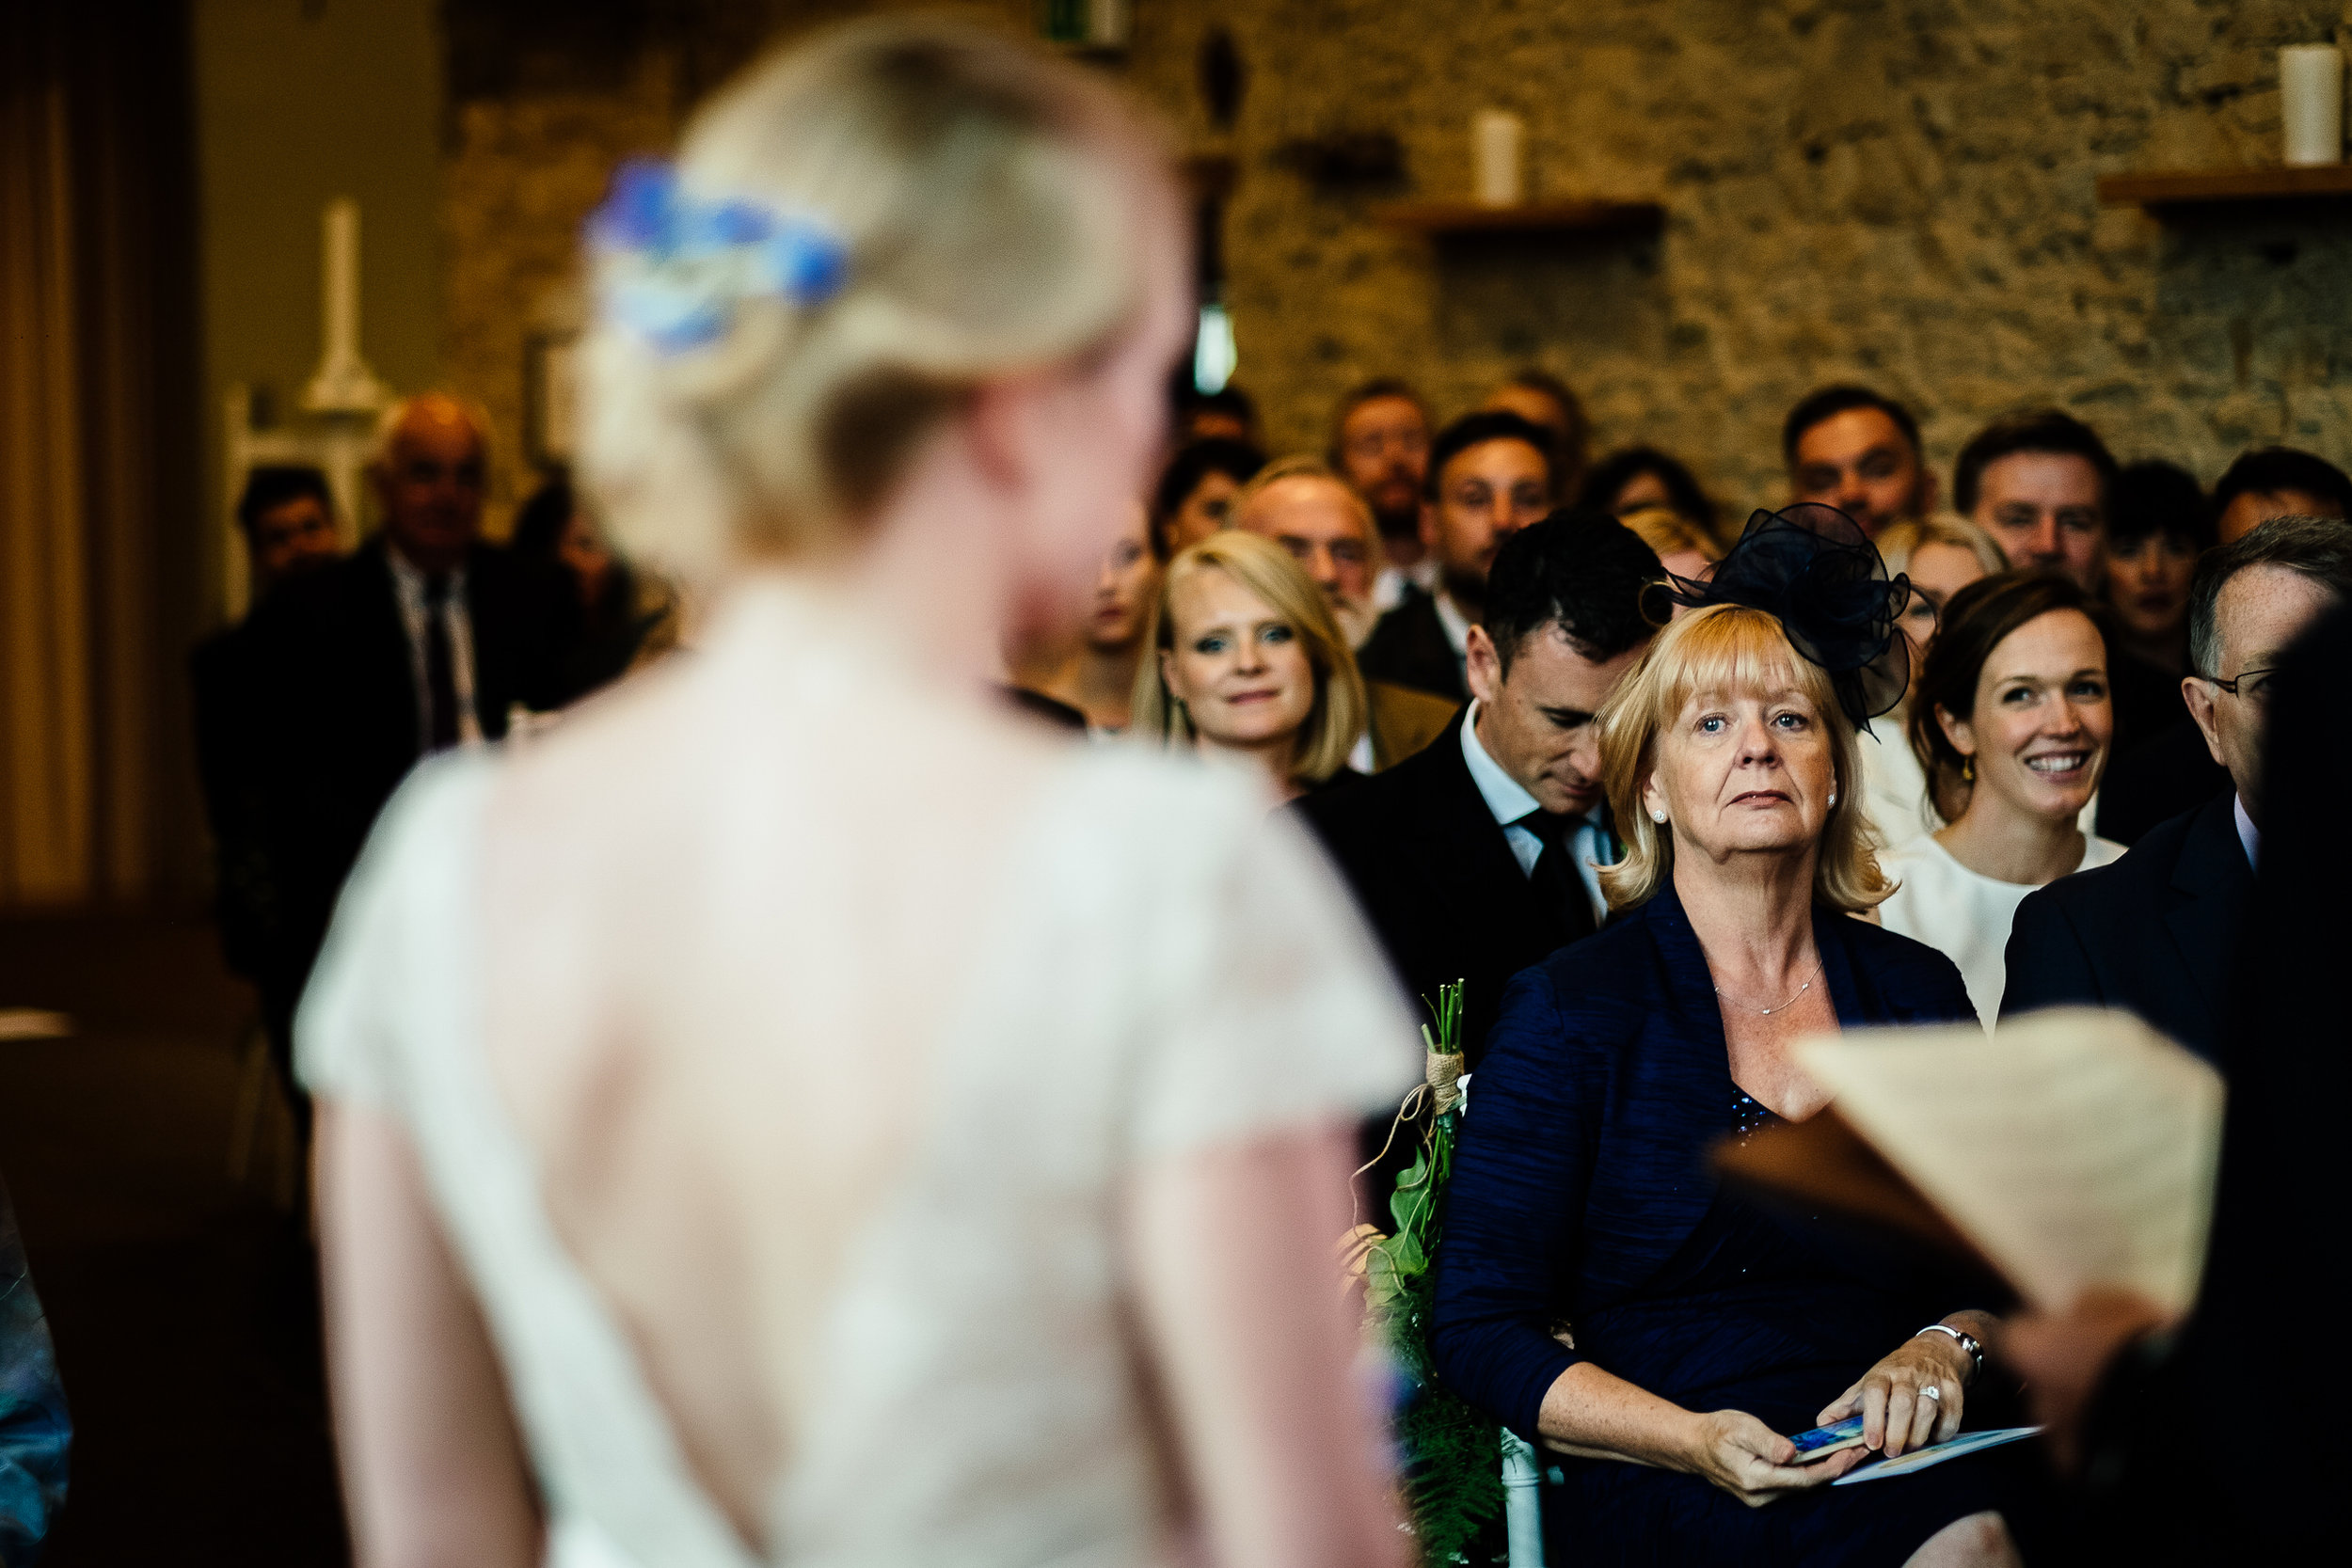 The guests look on at a wedding at Merriscourt Wedding Venue, Oxfordshire